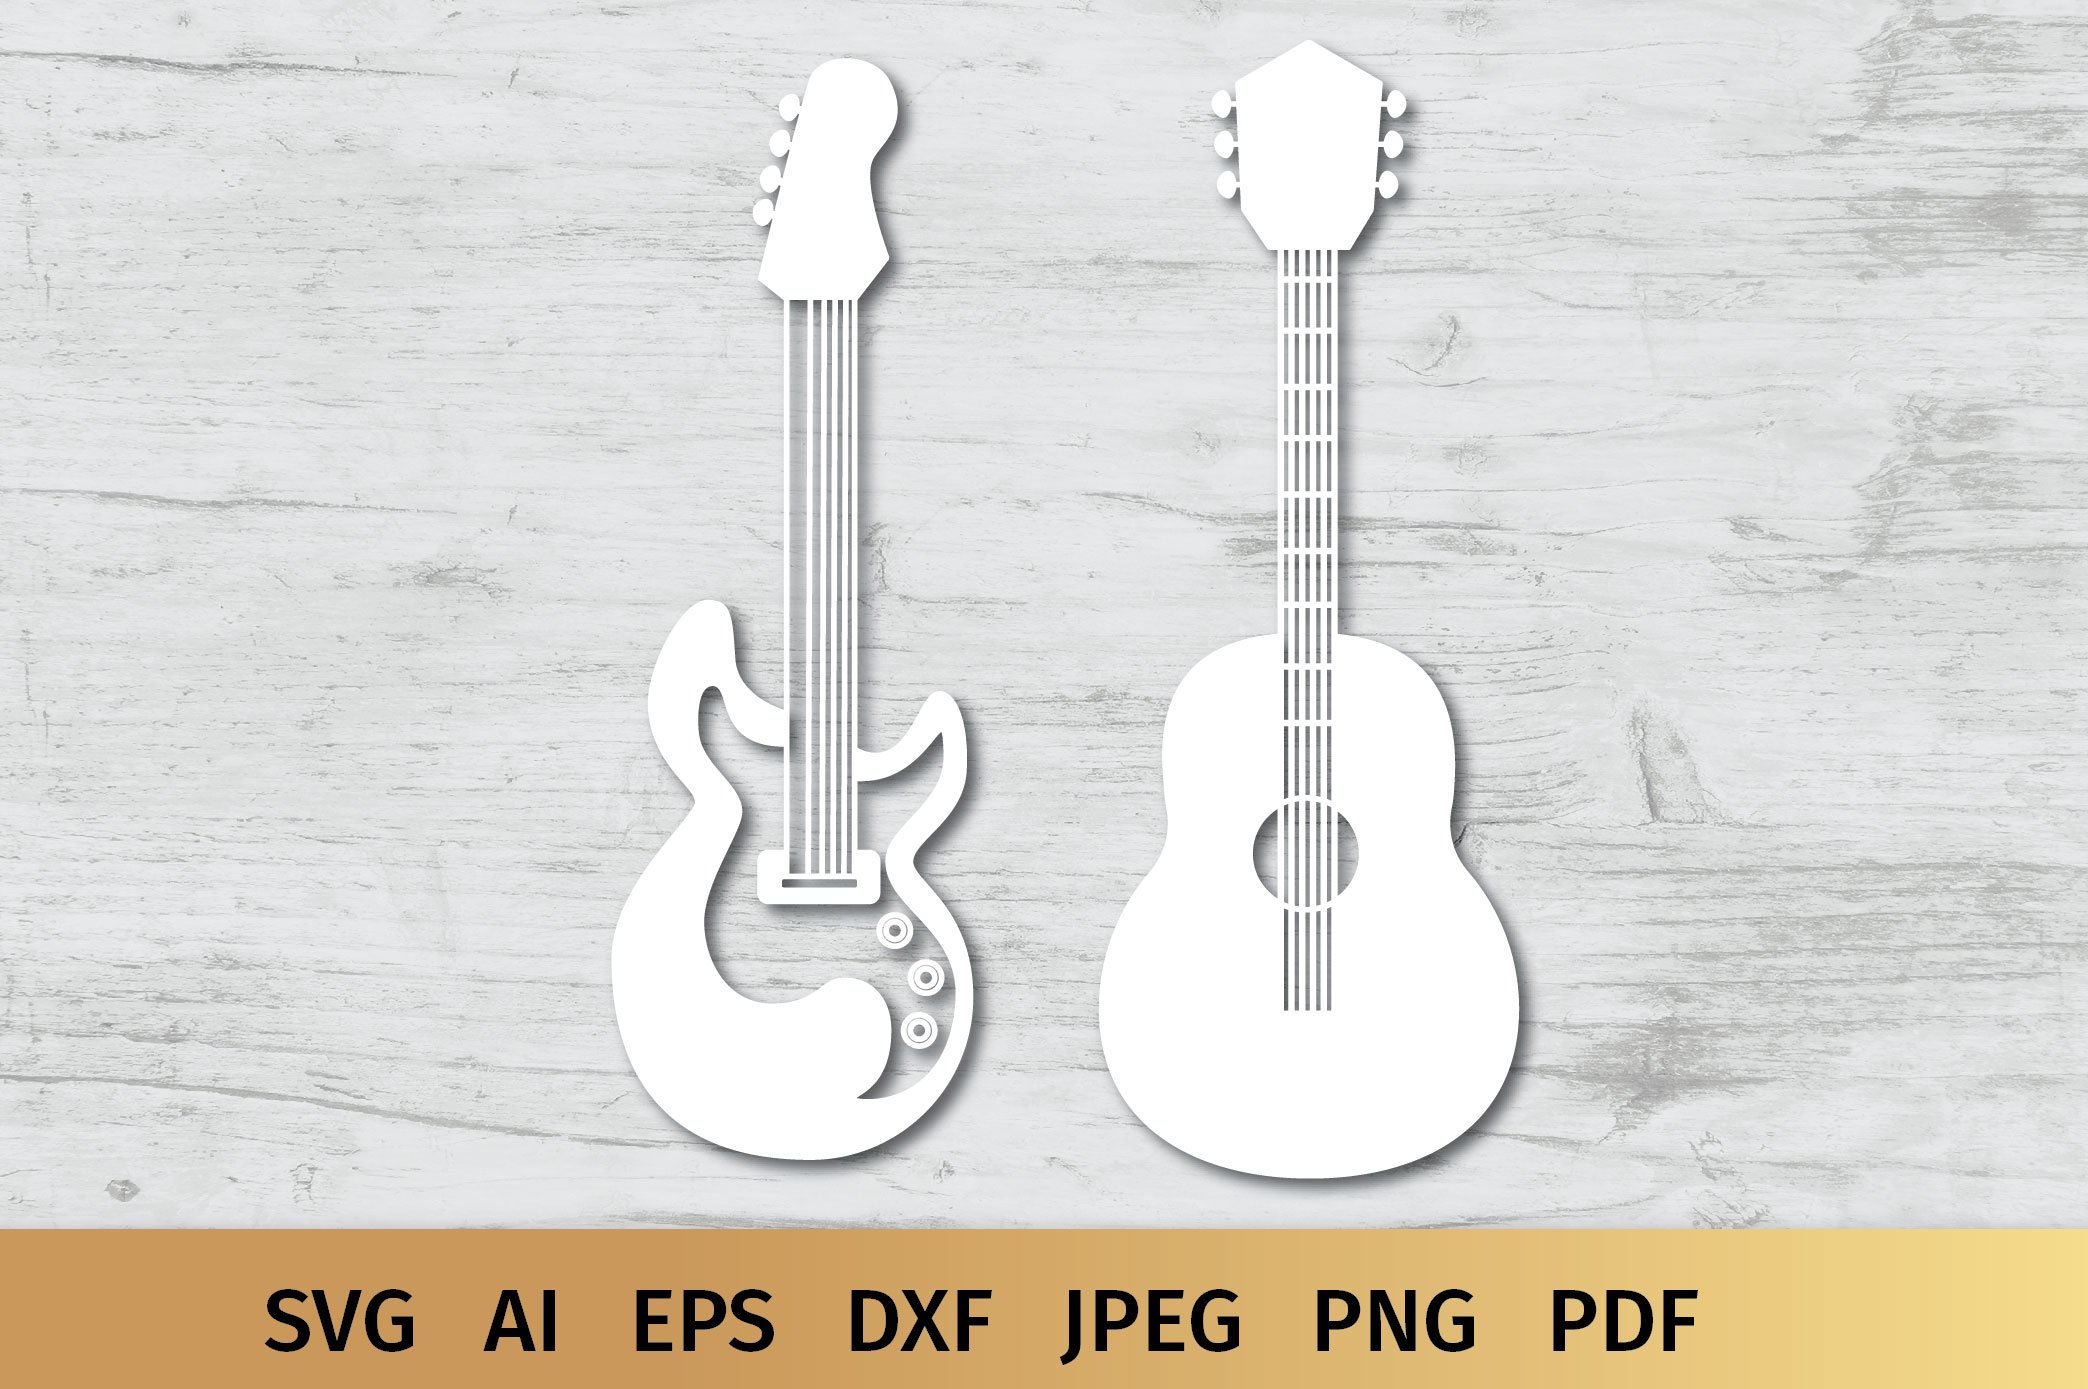 White guitars on a wooden background.